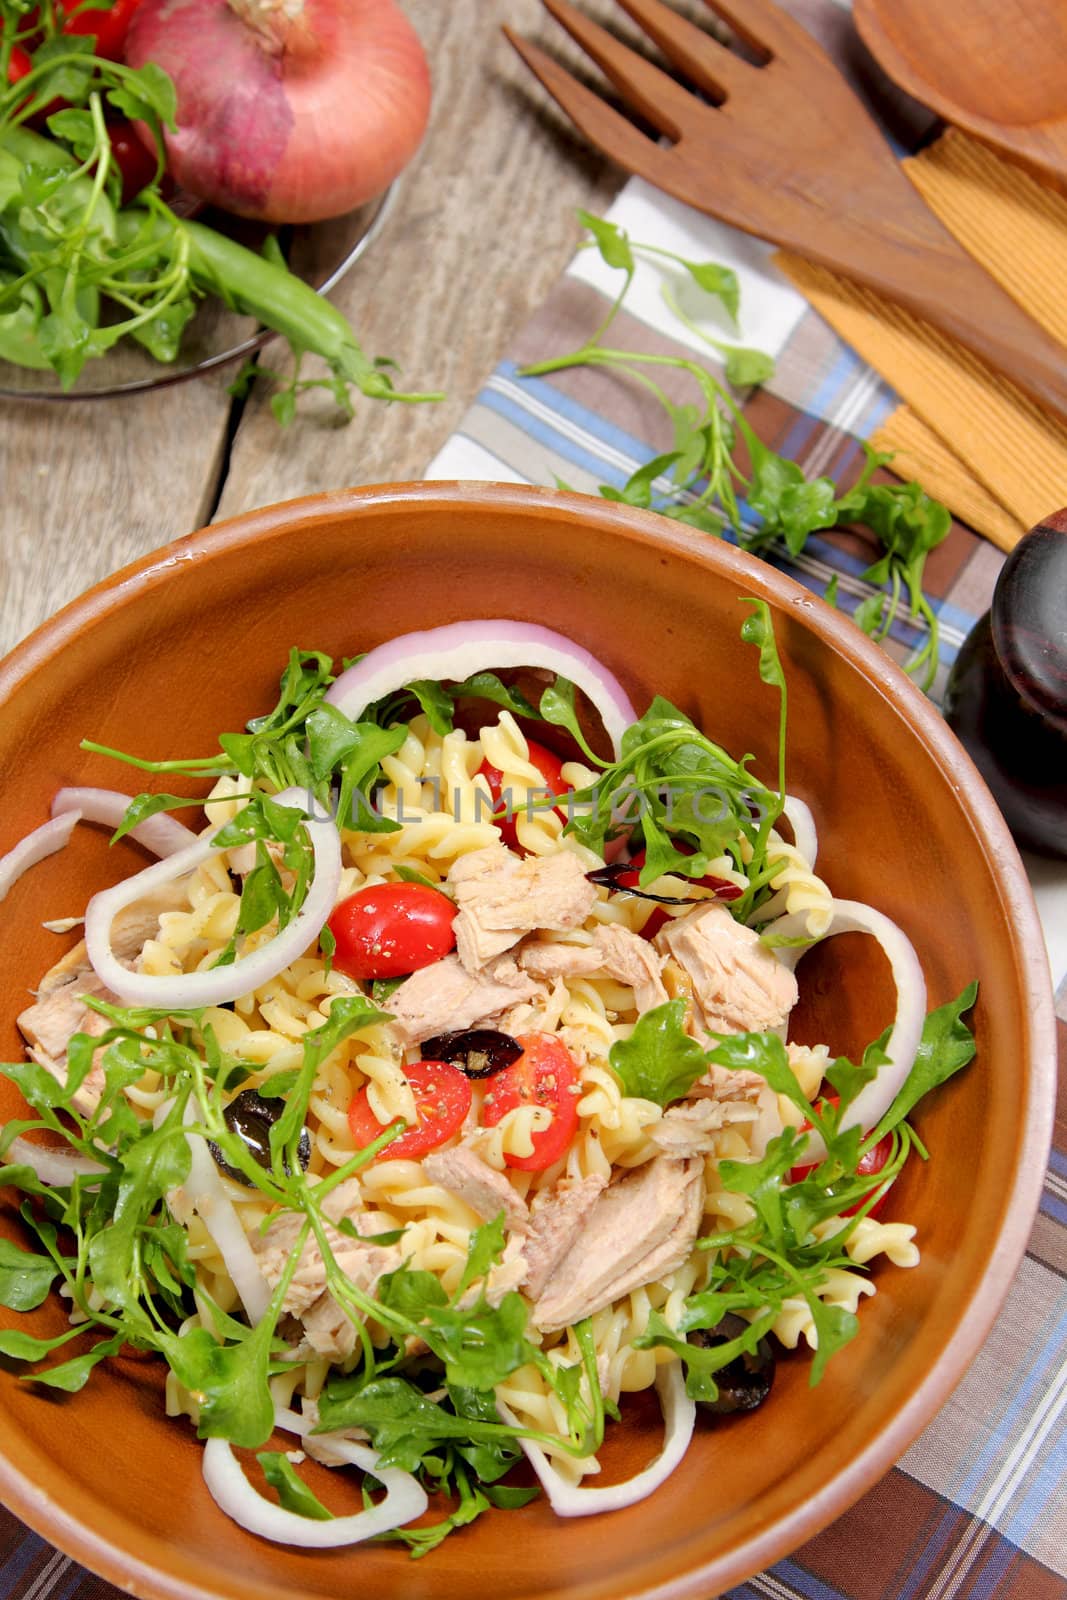 Fusilli with Tuna and olive salad in wood bowl